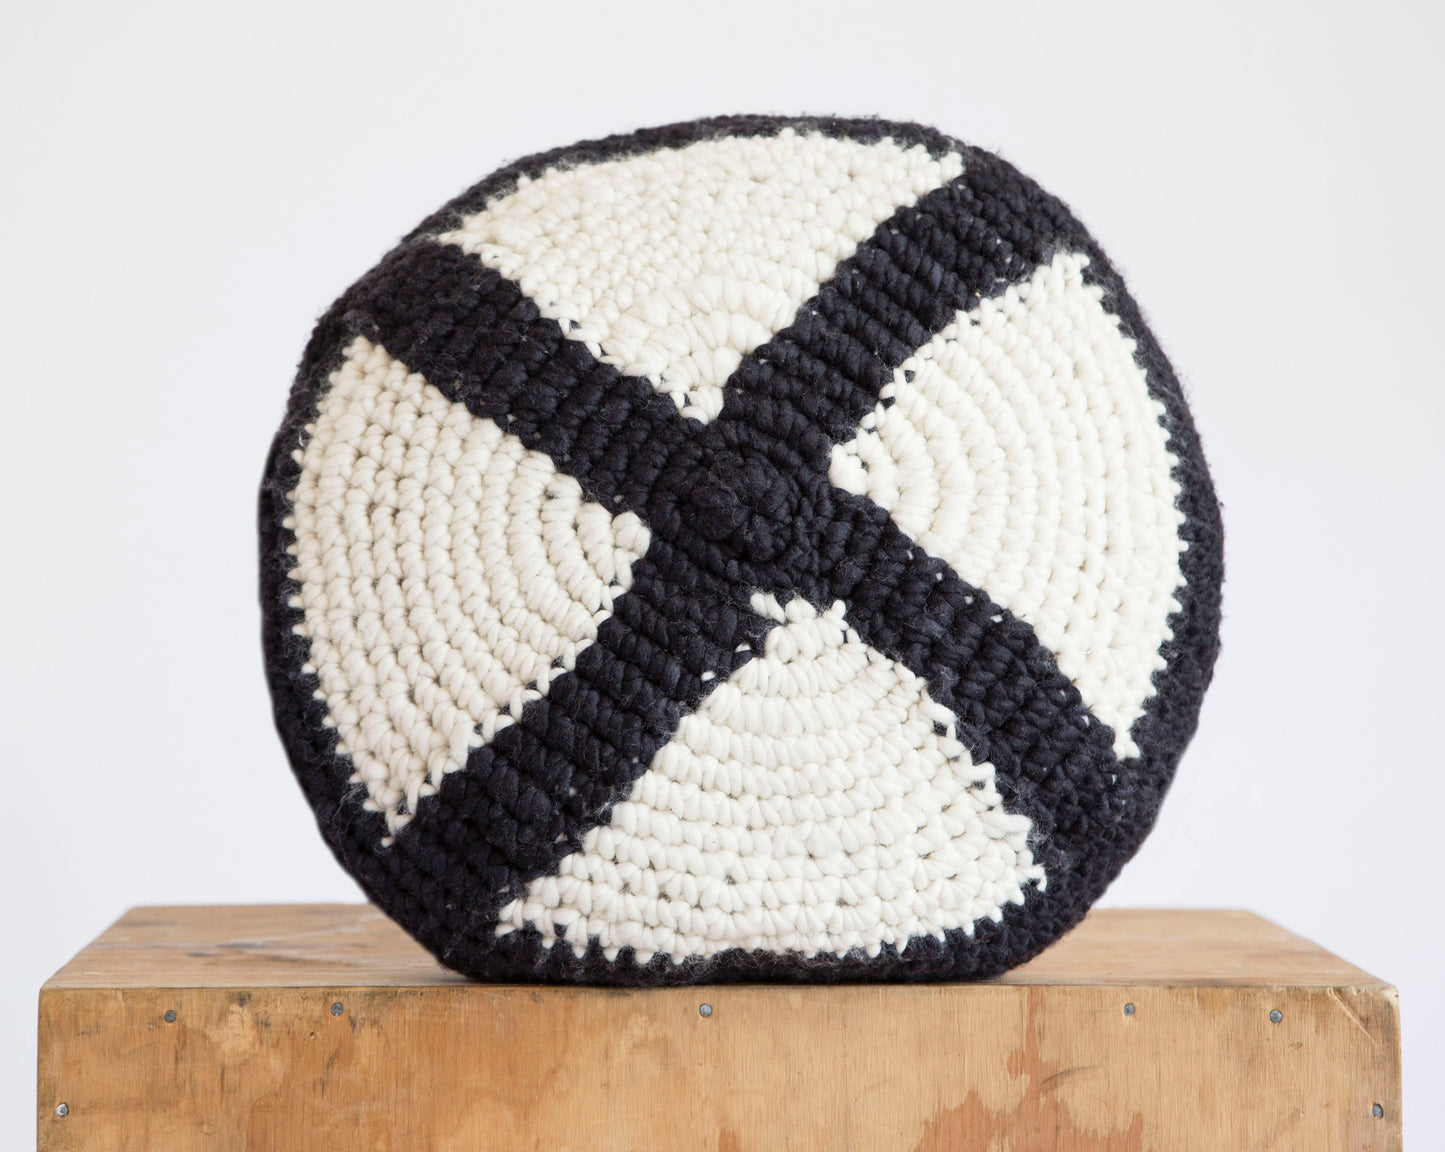 Round Crochet Cushion in Black & Natural wool Cosmo Tierra